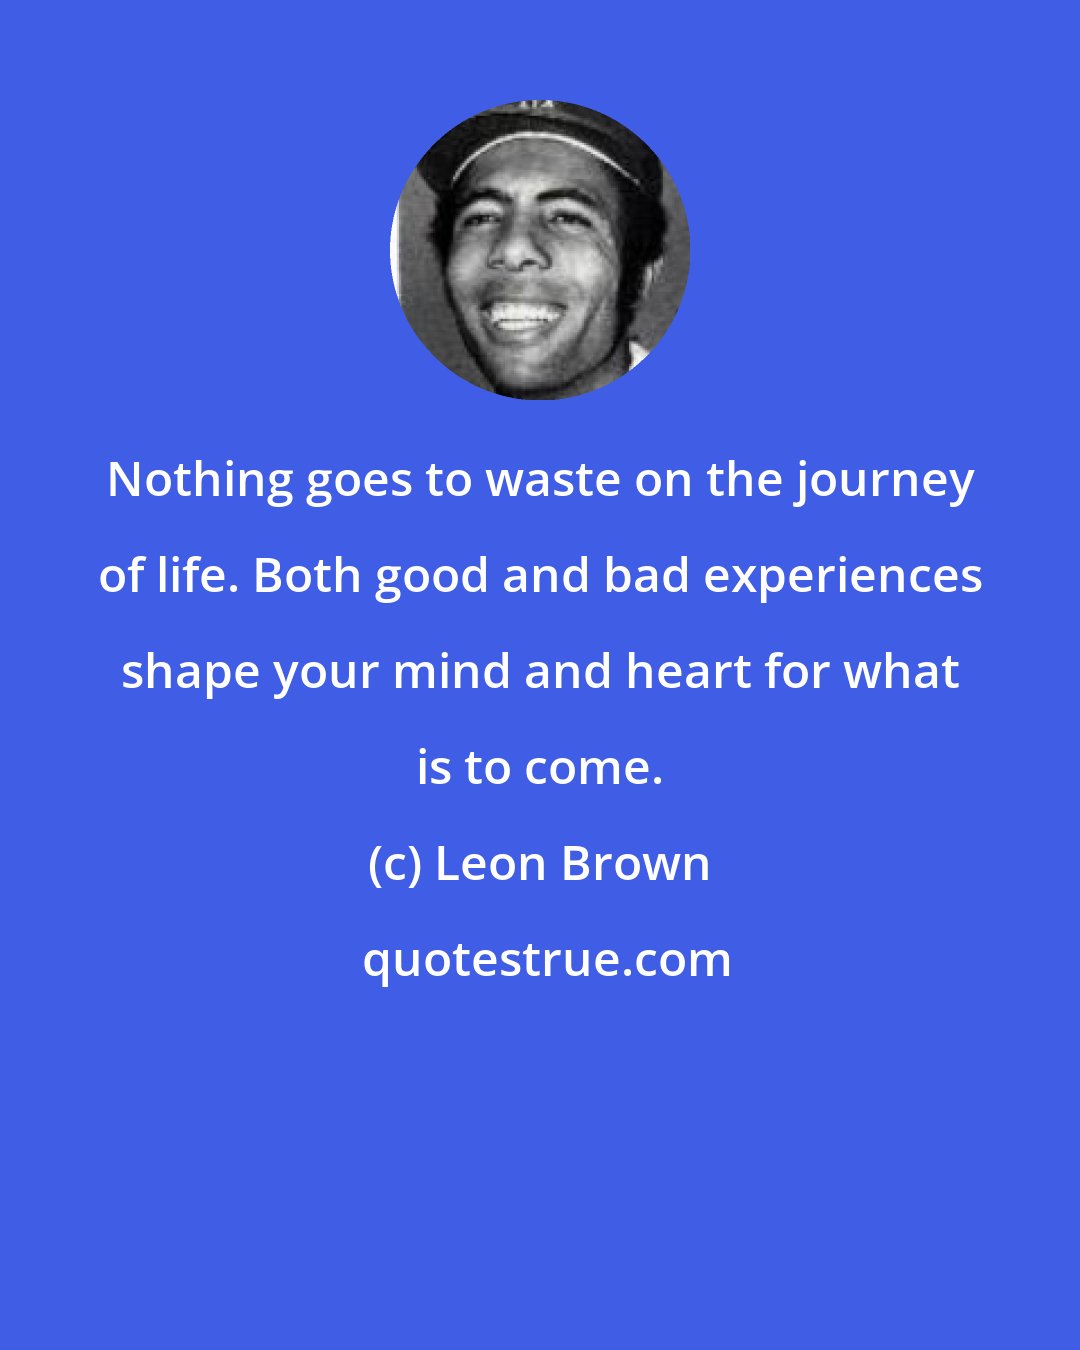 Leon Brown: Nothing goes to waste on the journey of life. Both good and bad experiences shape your mind and heart for what is to come.